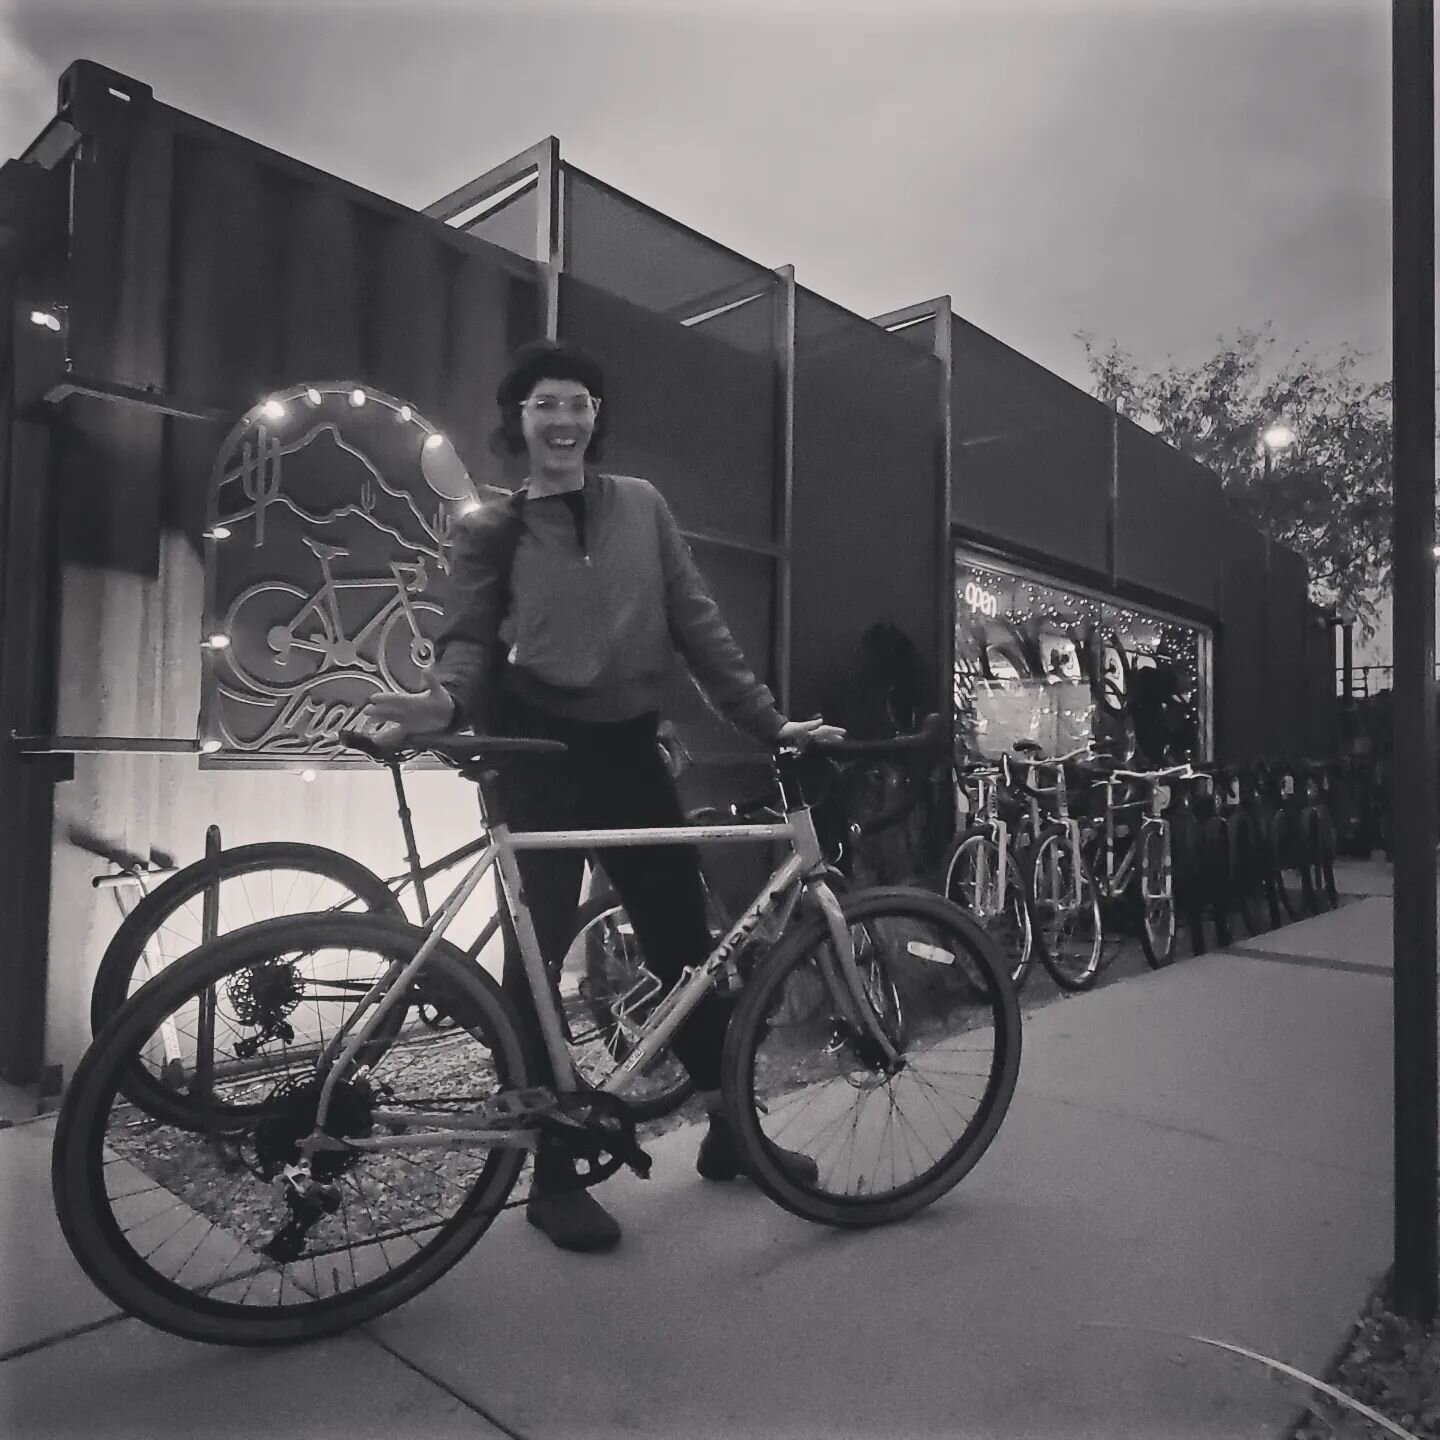 Artsy b&amp;w to make up for a dirty photo lens. 🖤🤍

This potato quality photo features a lovely human being (and adventure rider) with her new Surly Midnight Special! Thanks a whole lot Milisa! It's been really cool getting to know ya. Let's go ri